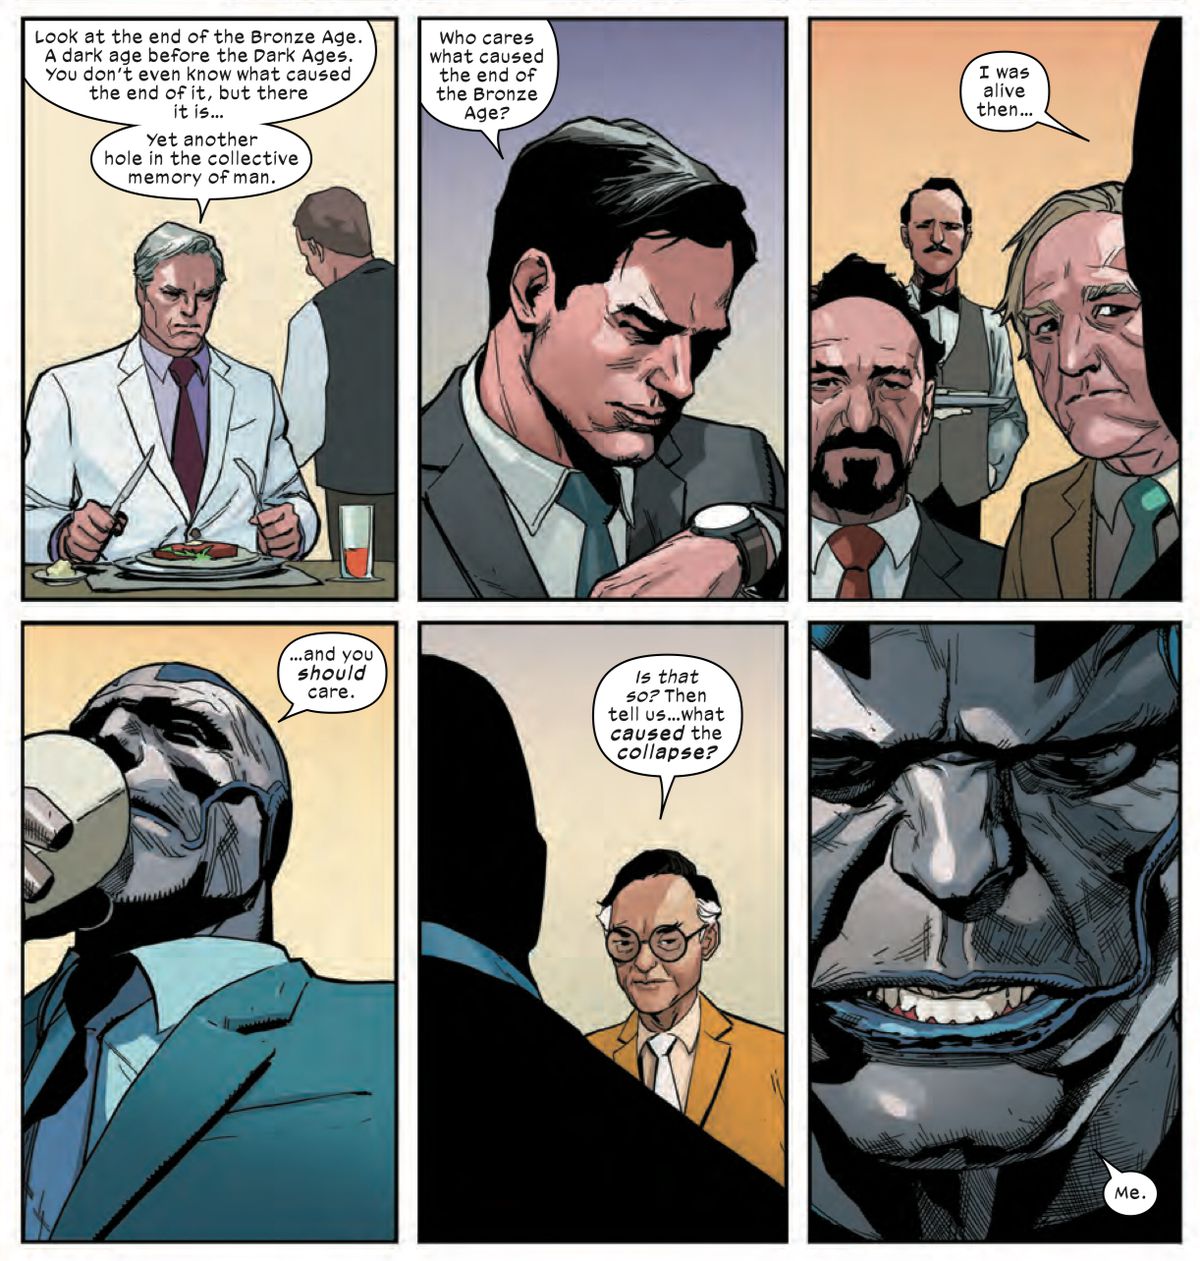 “Who cares what caused the end of the Bronze Age?” says an uppity American diplomat. Apocalypse tells him that he was alive then, and that he should. “What caused the collapse?” asks another diplomat, and Apocalypse answers: “Me.” From X-Men #4, Marvel Comics (2020).